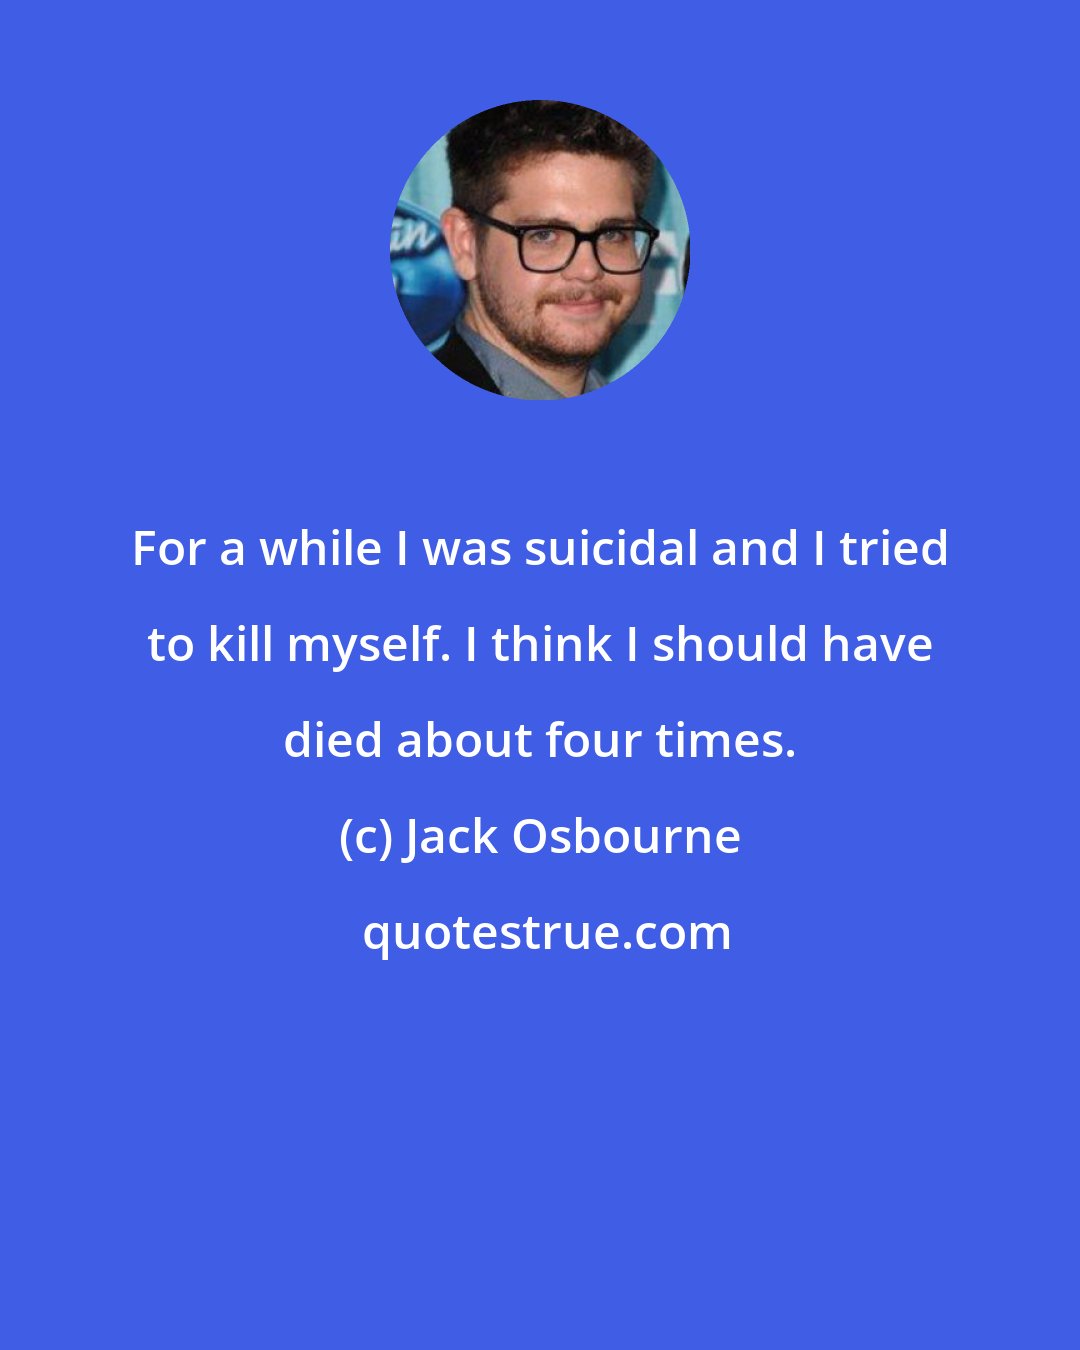 Jack Osbourne: For a while I was suicidal and I tried to kill myself. I think I should have died about four times.